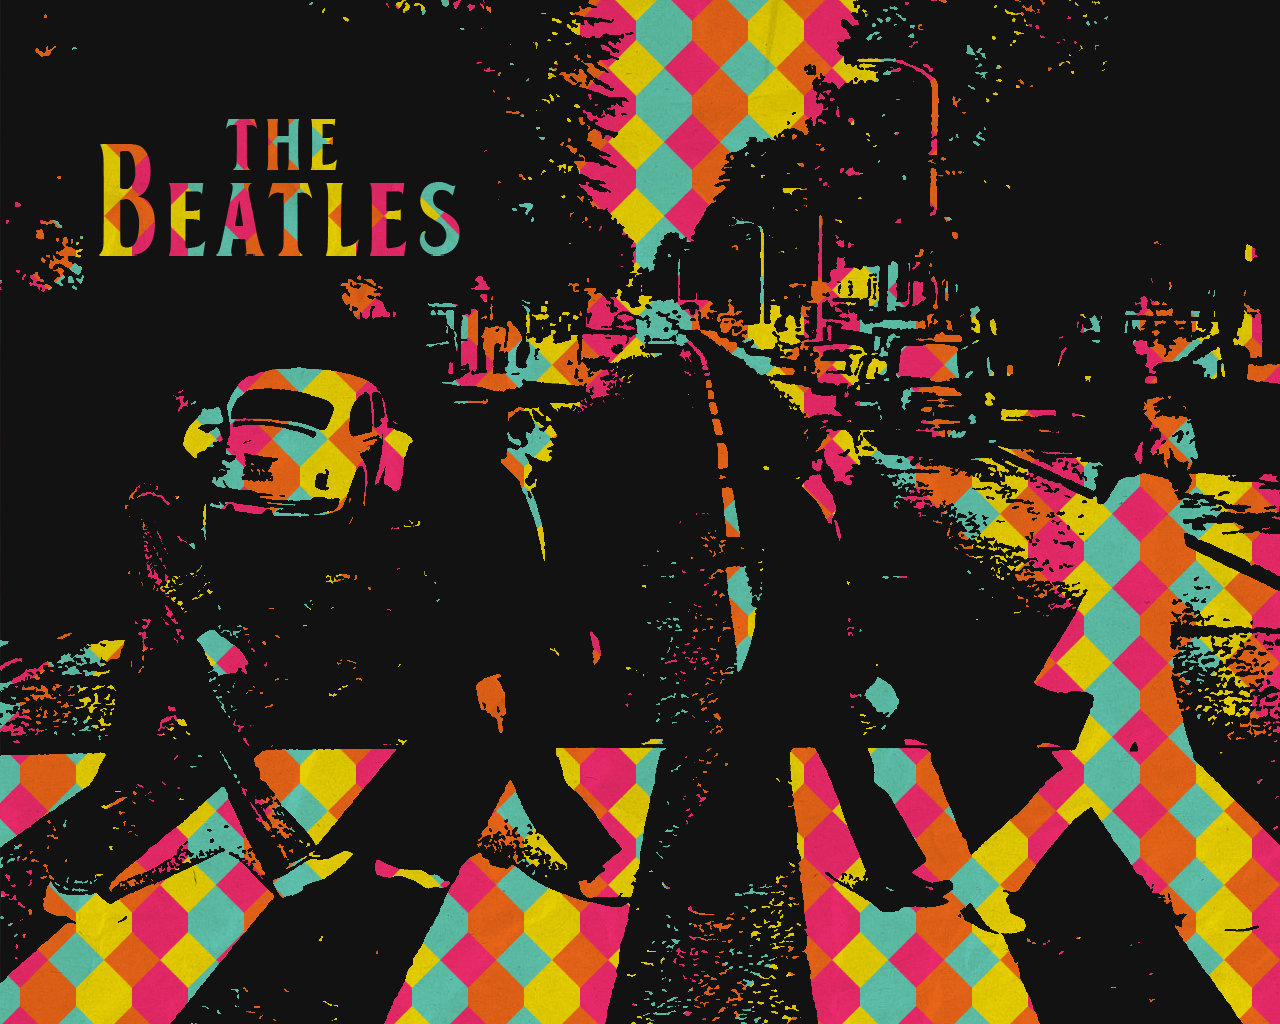 The Beatles Wallpaper by Feenster64 on